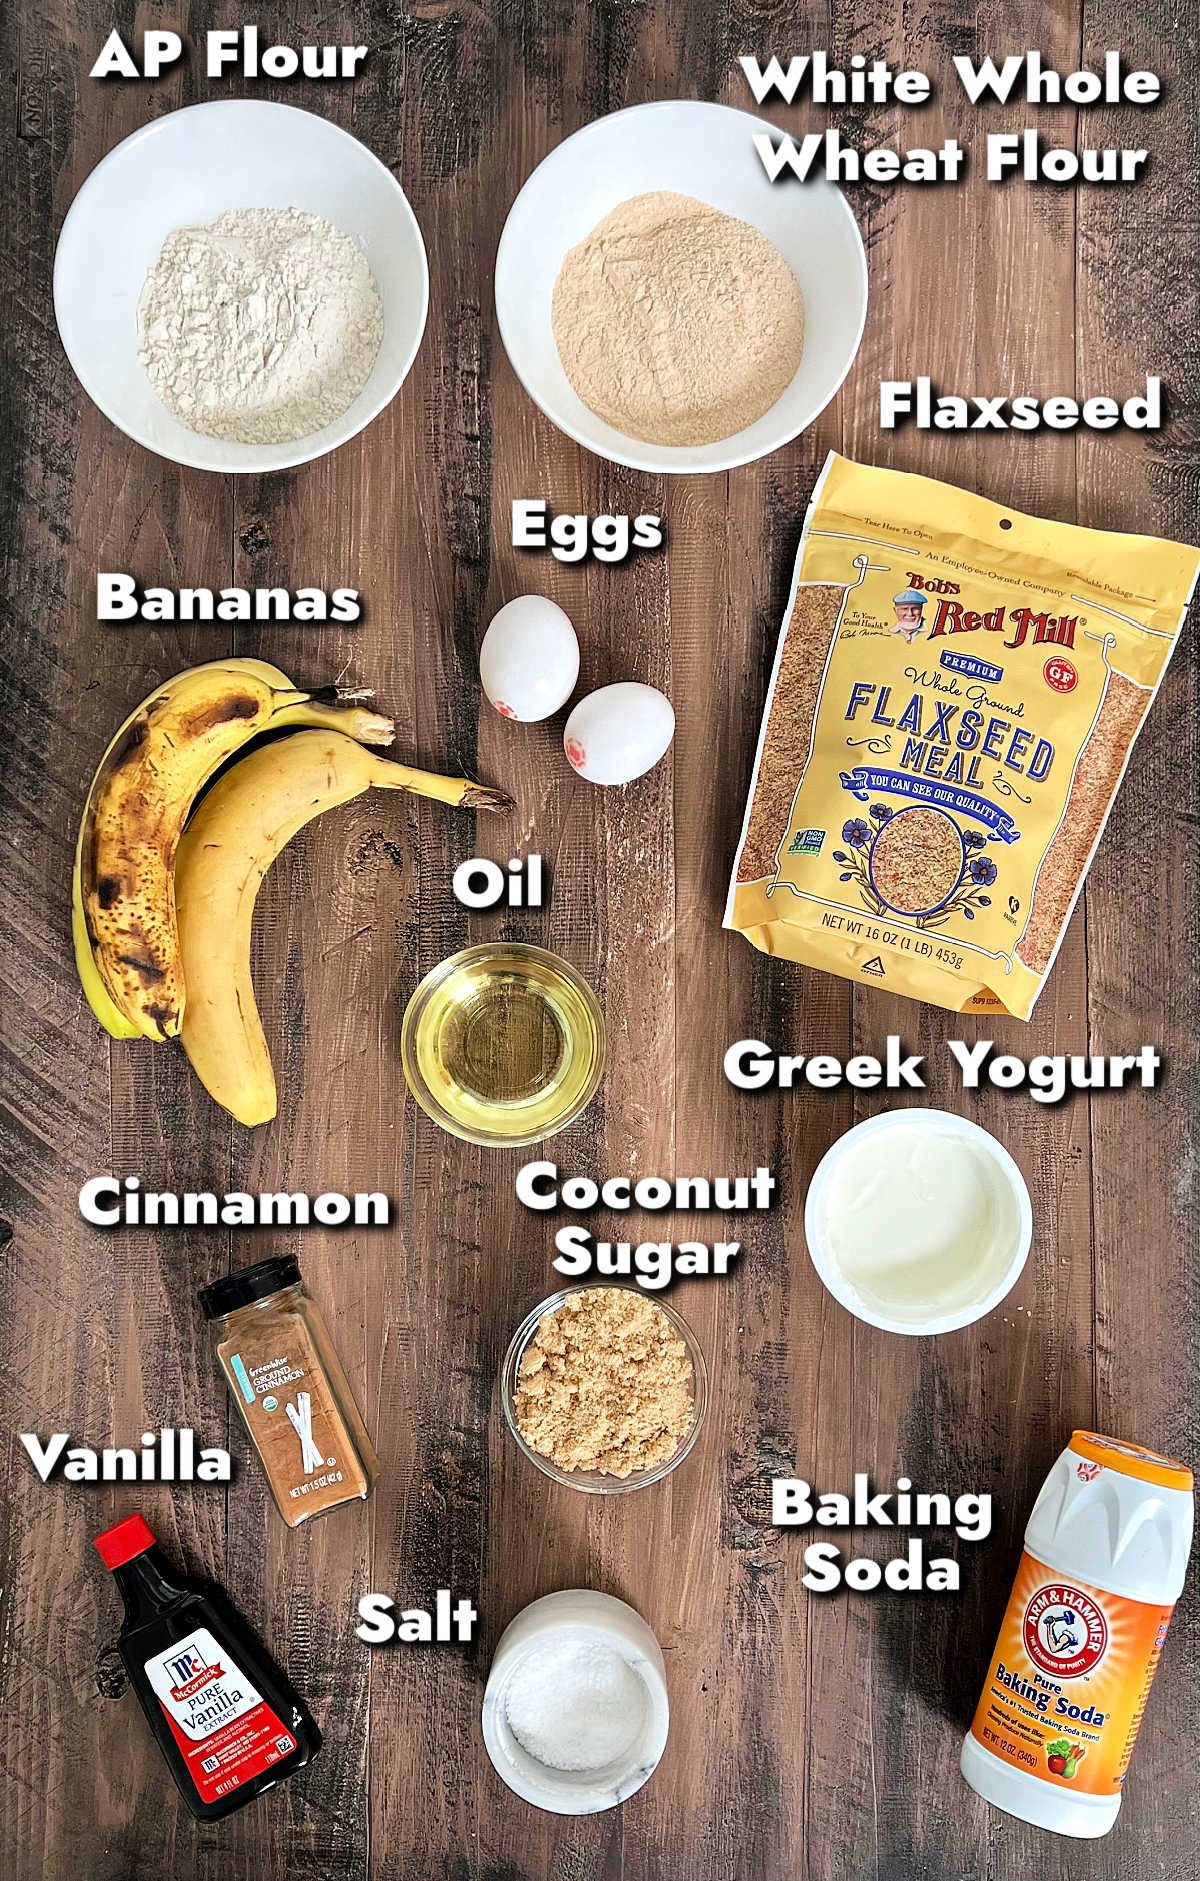 Ingredients for banana flaxseed bread on a wooden board.